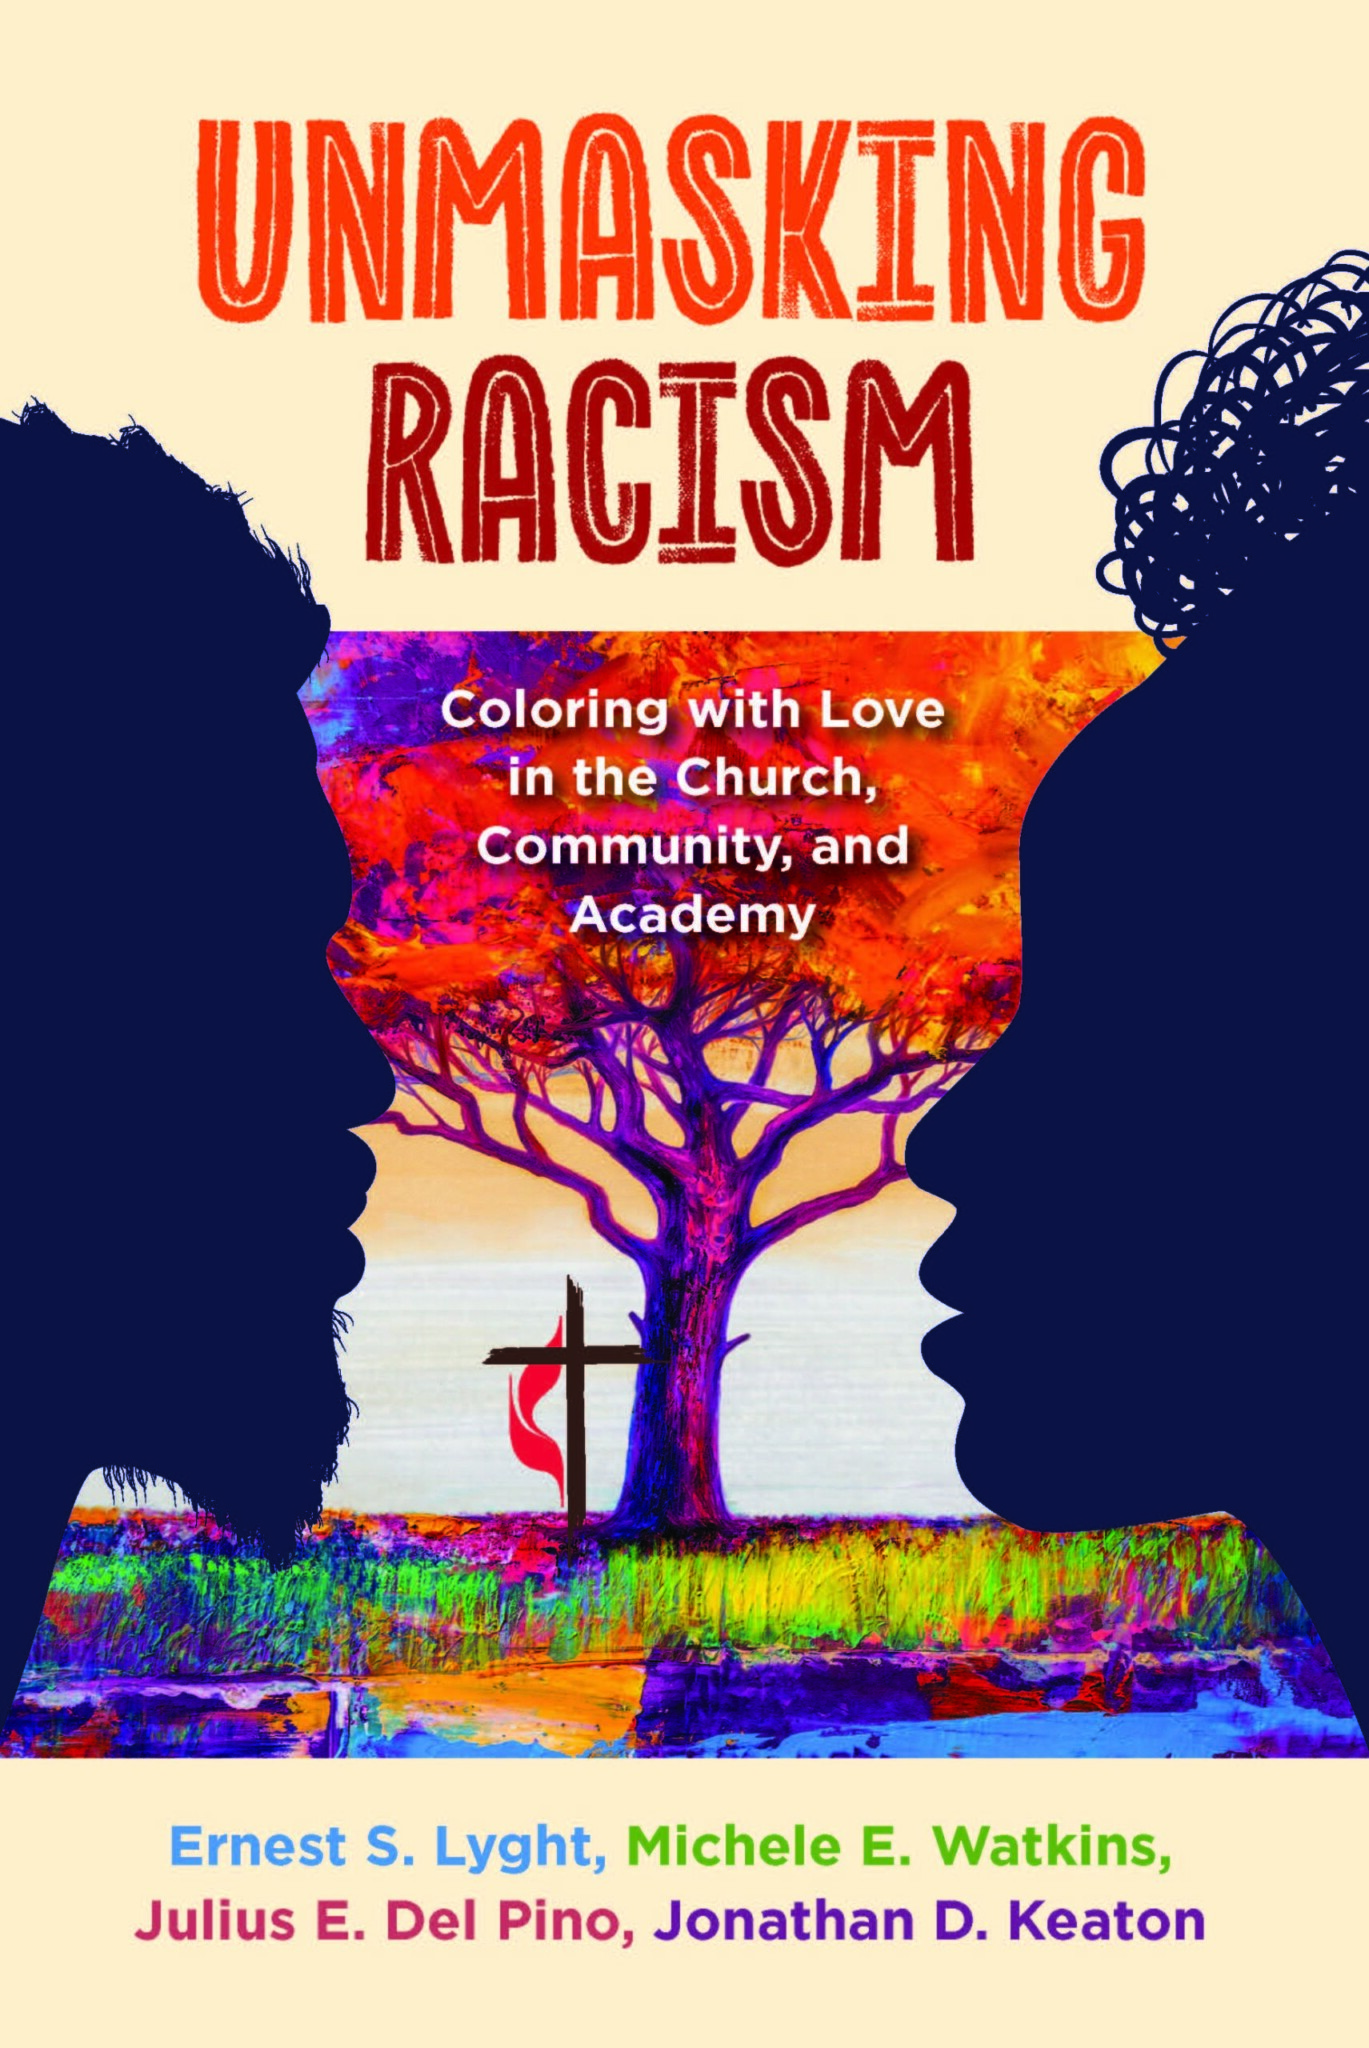 Unmasking Racism: Coloring with Love in the Church, Community, and Academy